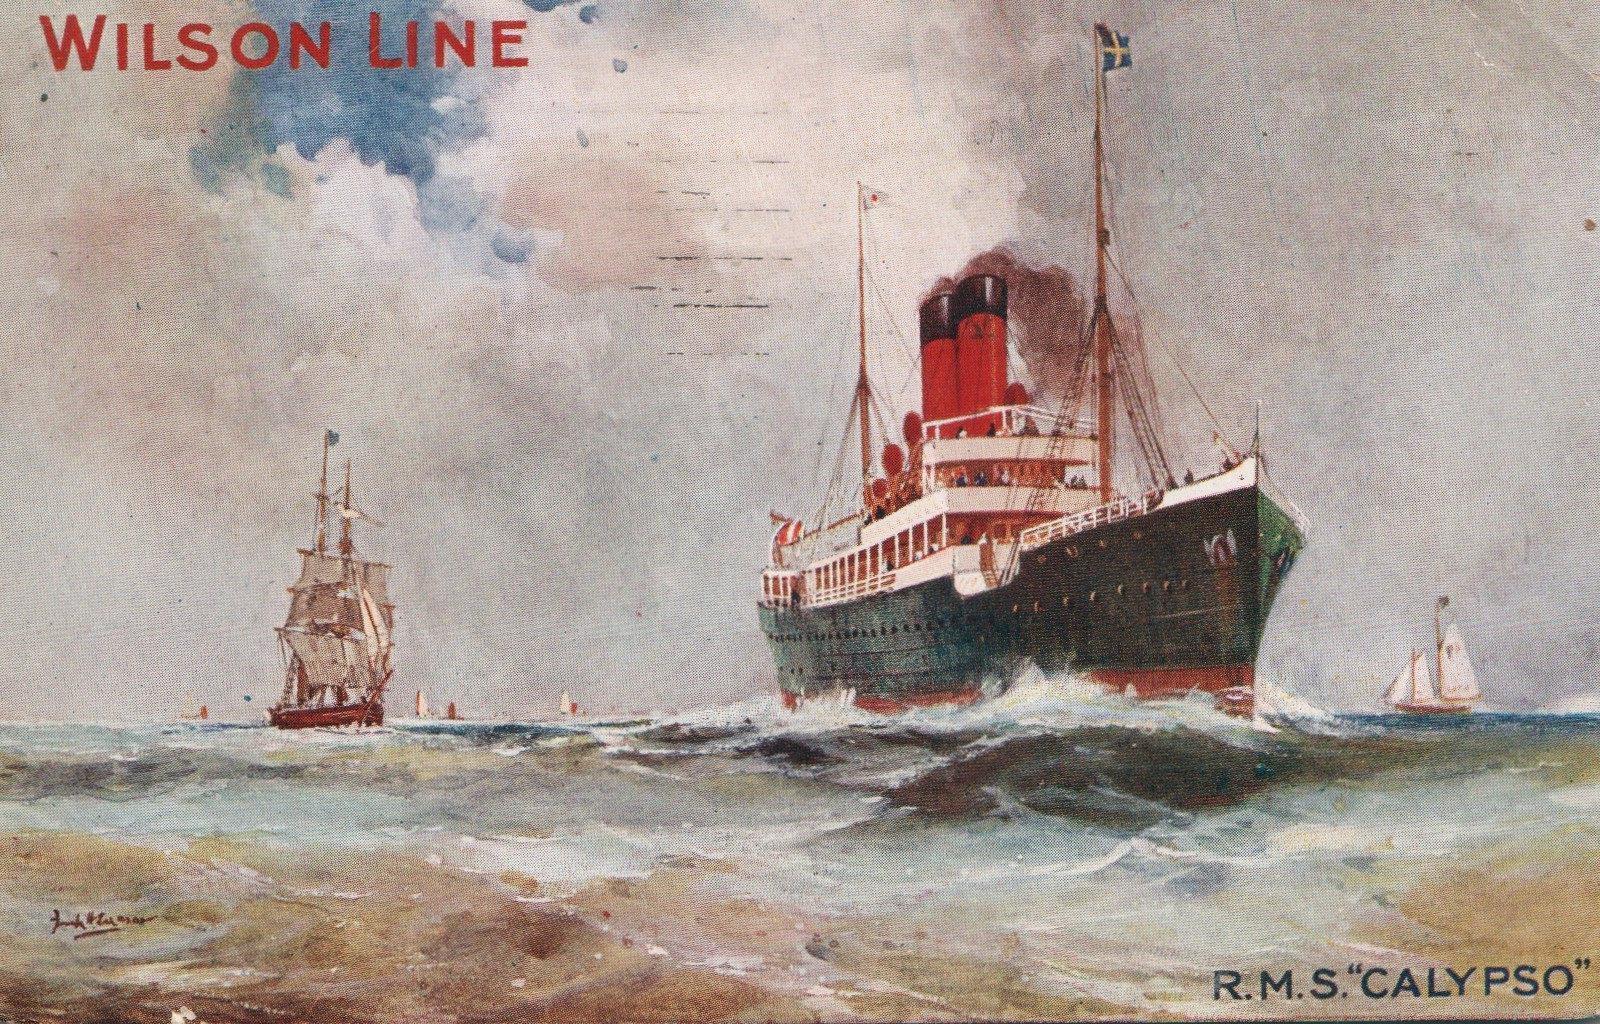 1914 VINTAGE Wilson Line RMS CALYPSO POSTCARD sent from Hull to Sierra Madre